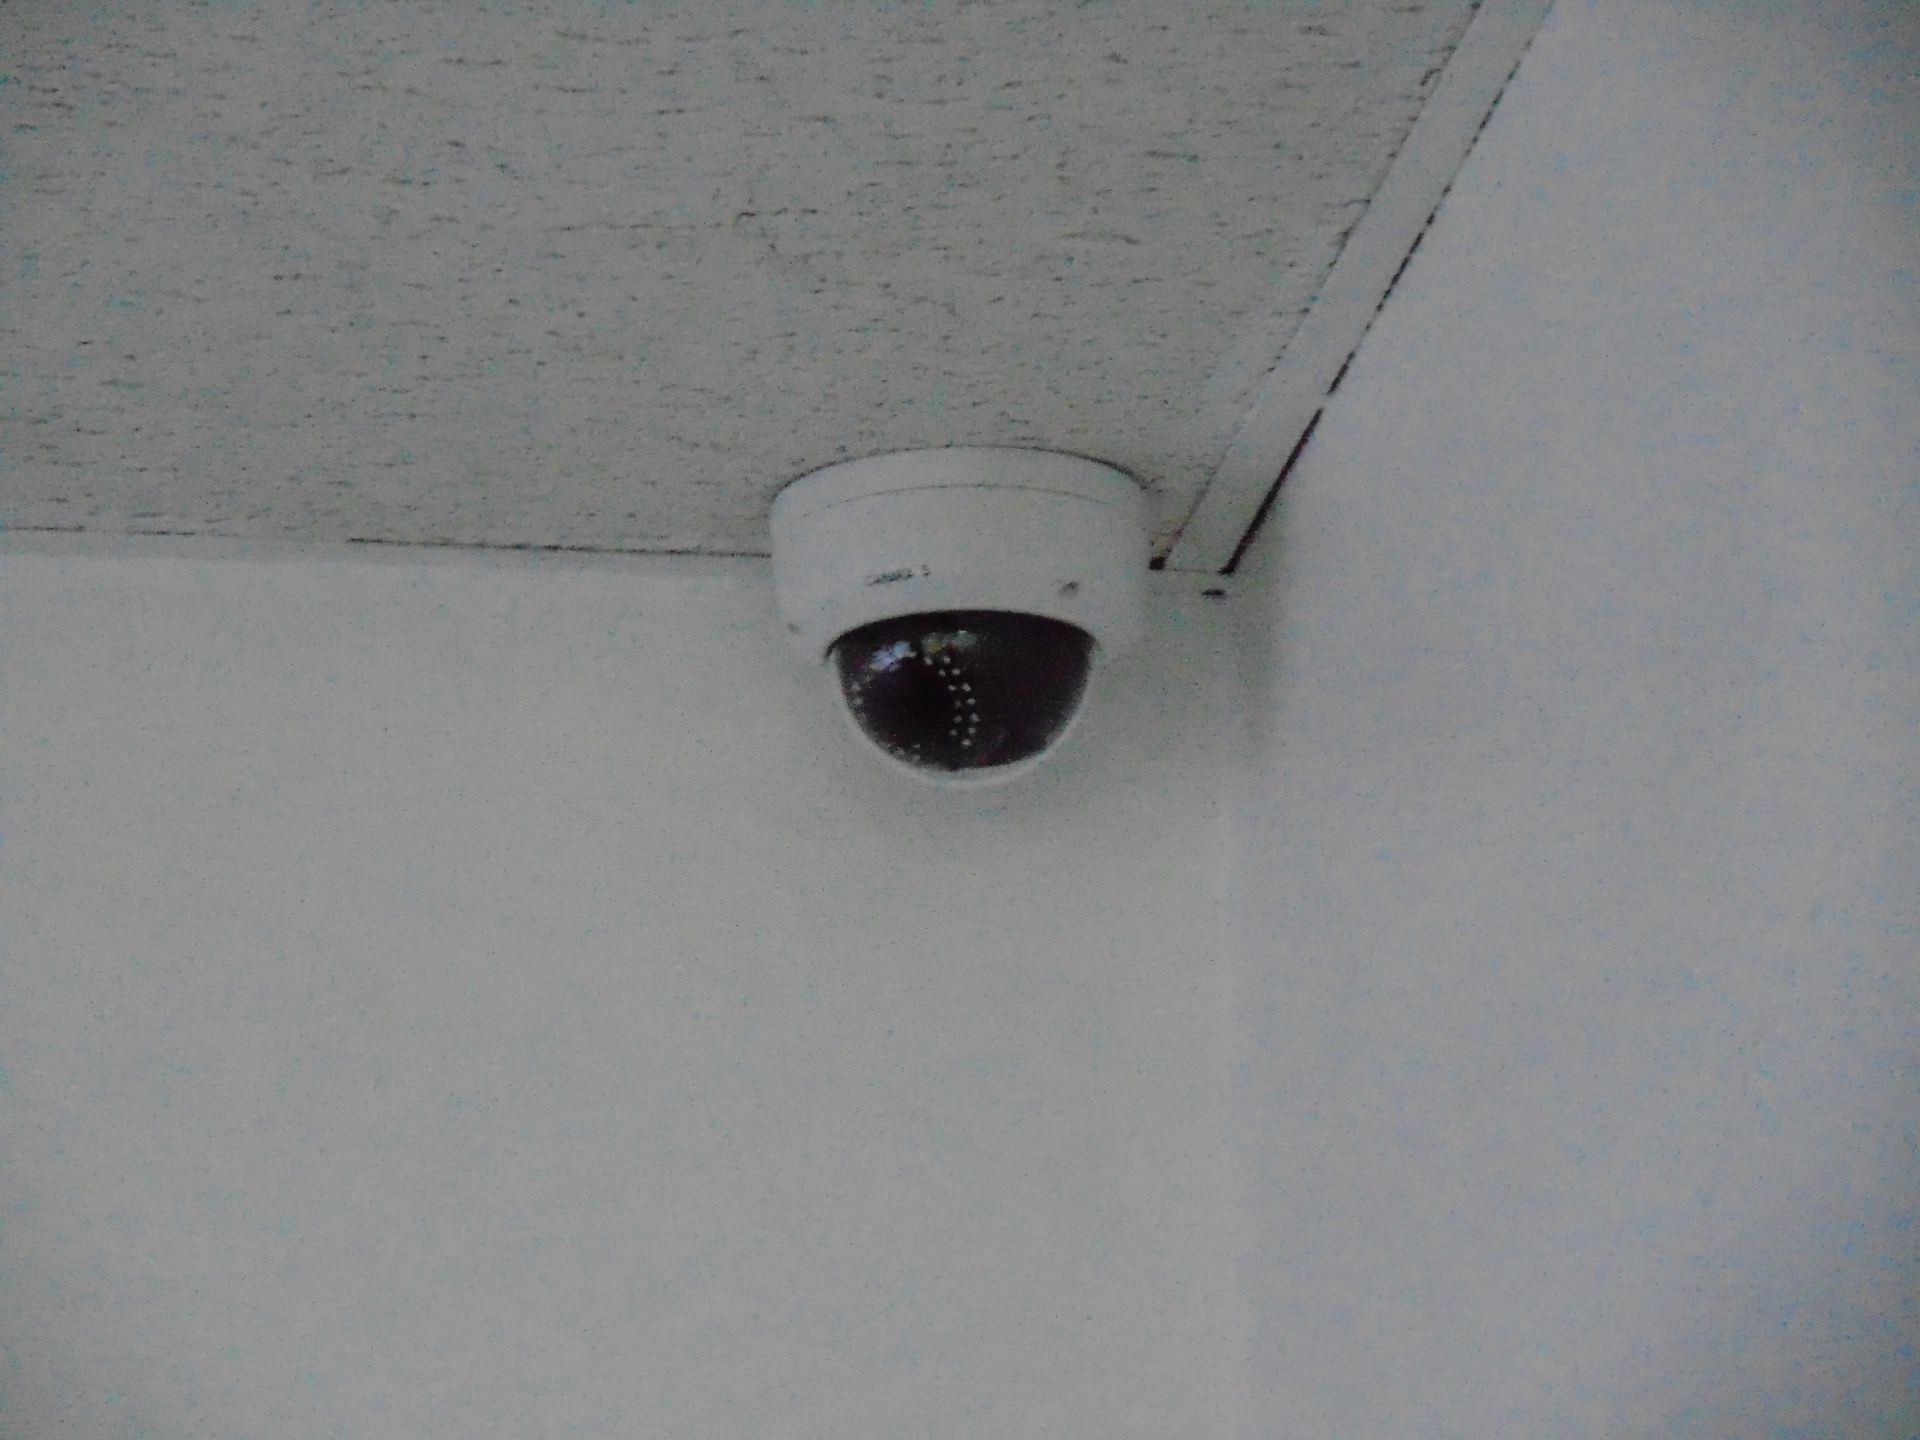 Camera Security System - Image 2 of 3